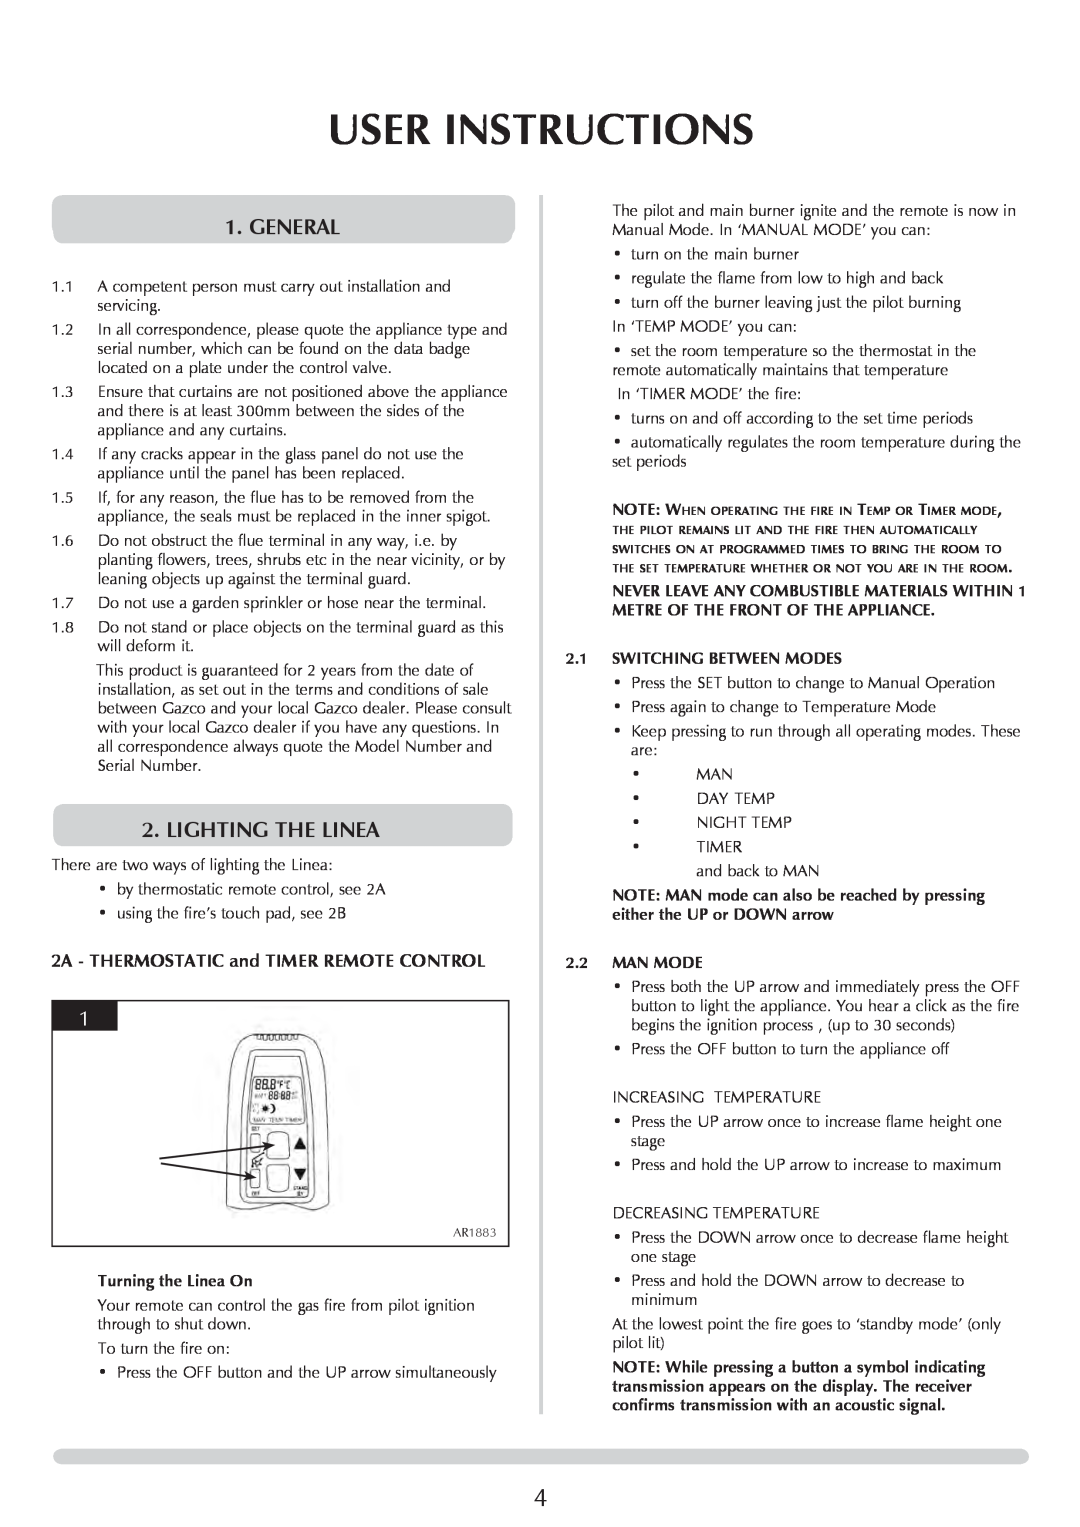 Stovax PR0731 manual User Instructions, general, lighting the LINEA, 2A - THERMOSTATIC and TIMER REMOTE CONTROL 